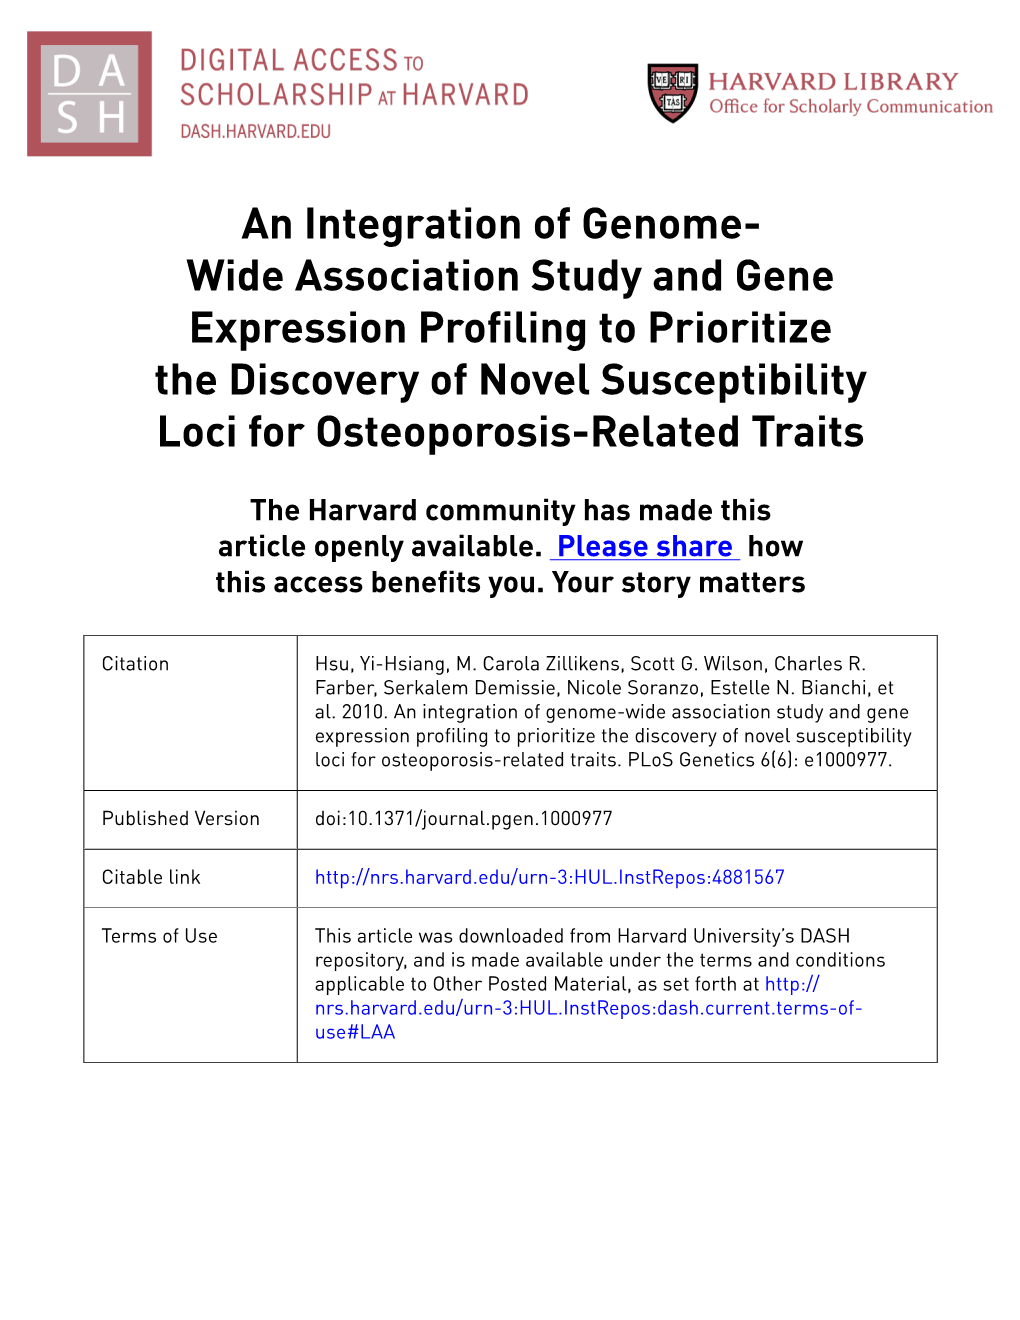 An Integration of Genome- Wide Association Study and Gene